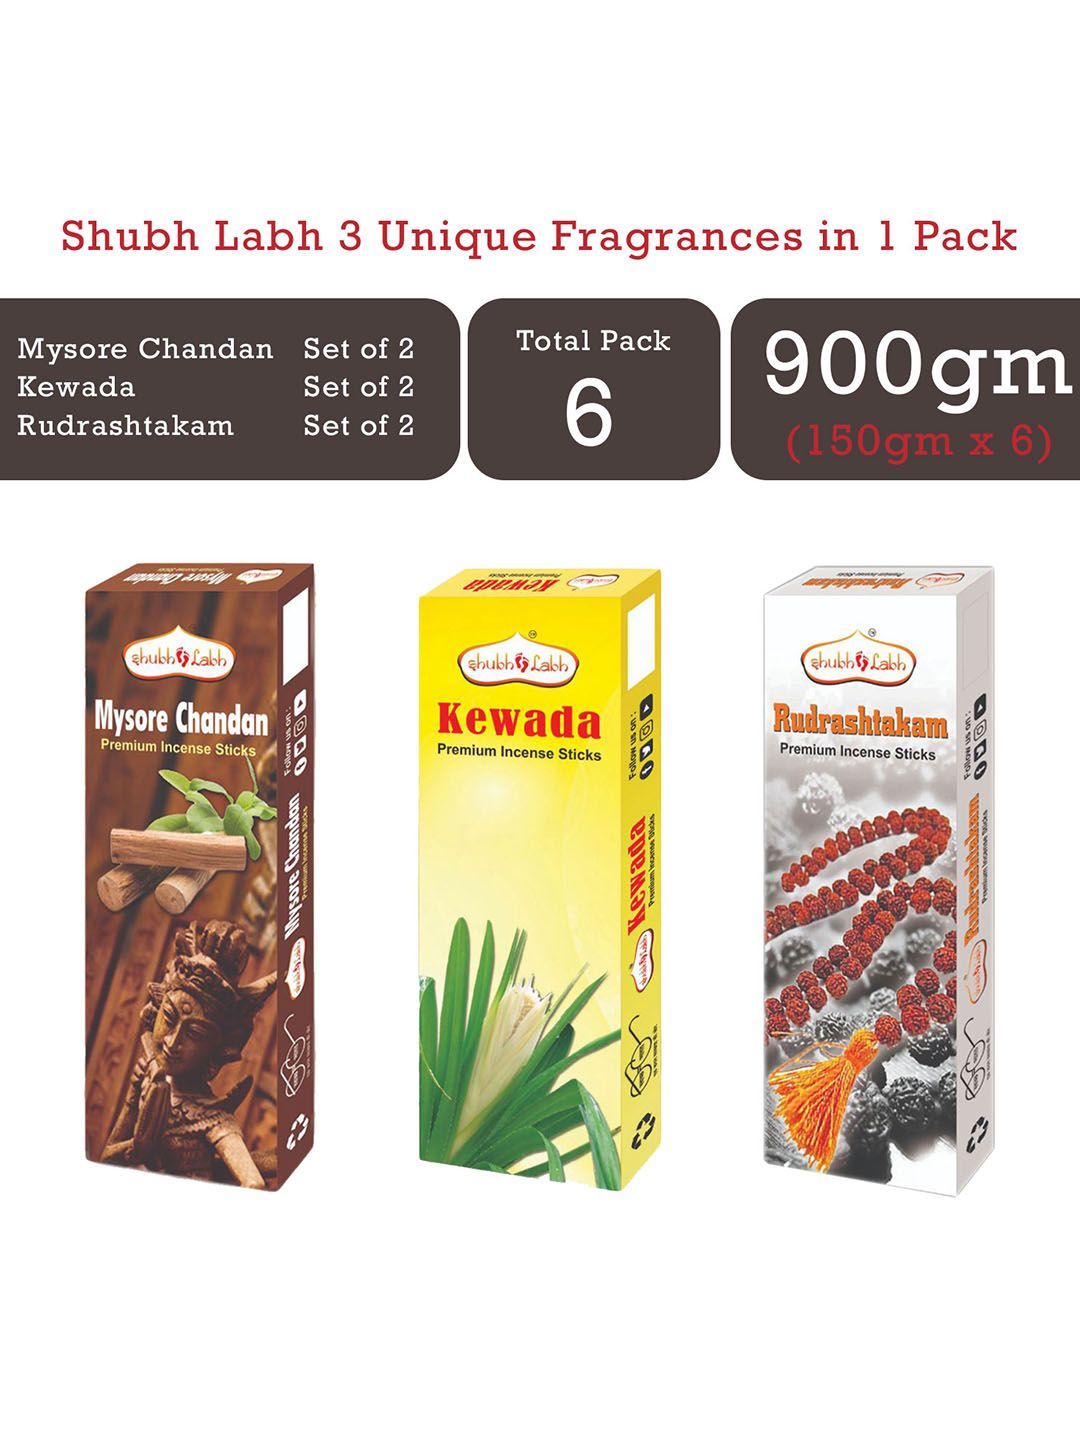 Shubh Labh Pack of 6 Unique Fragrances Incense Sticks Price in India